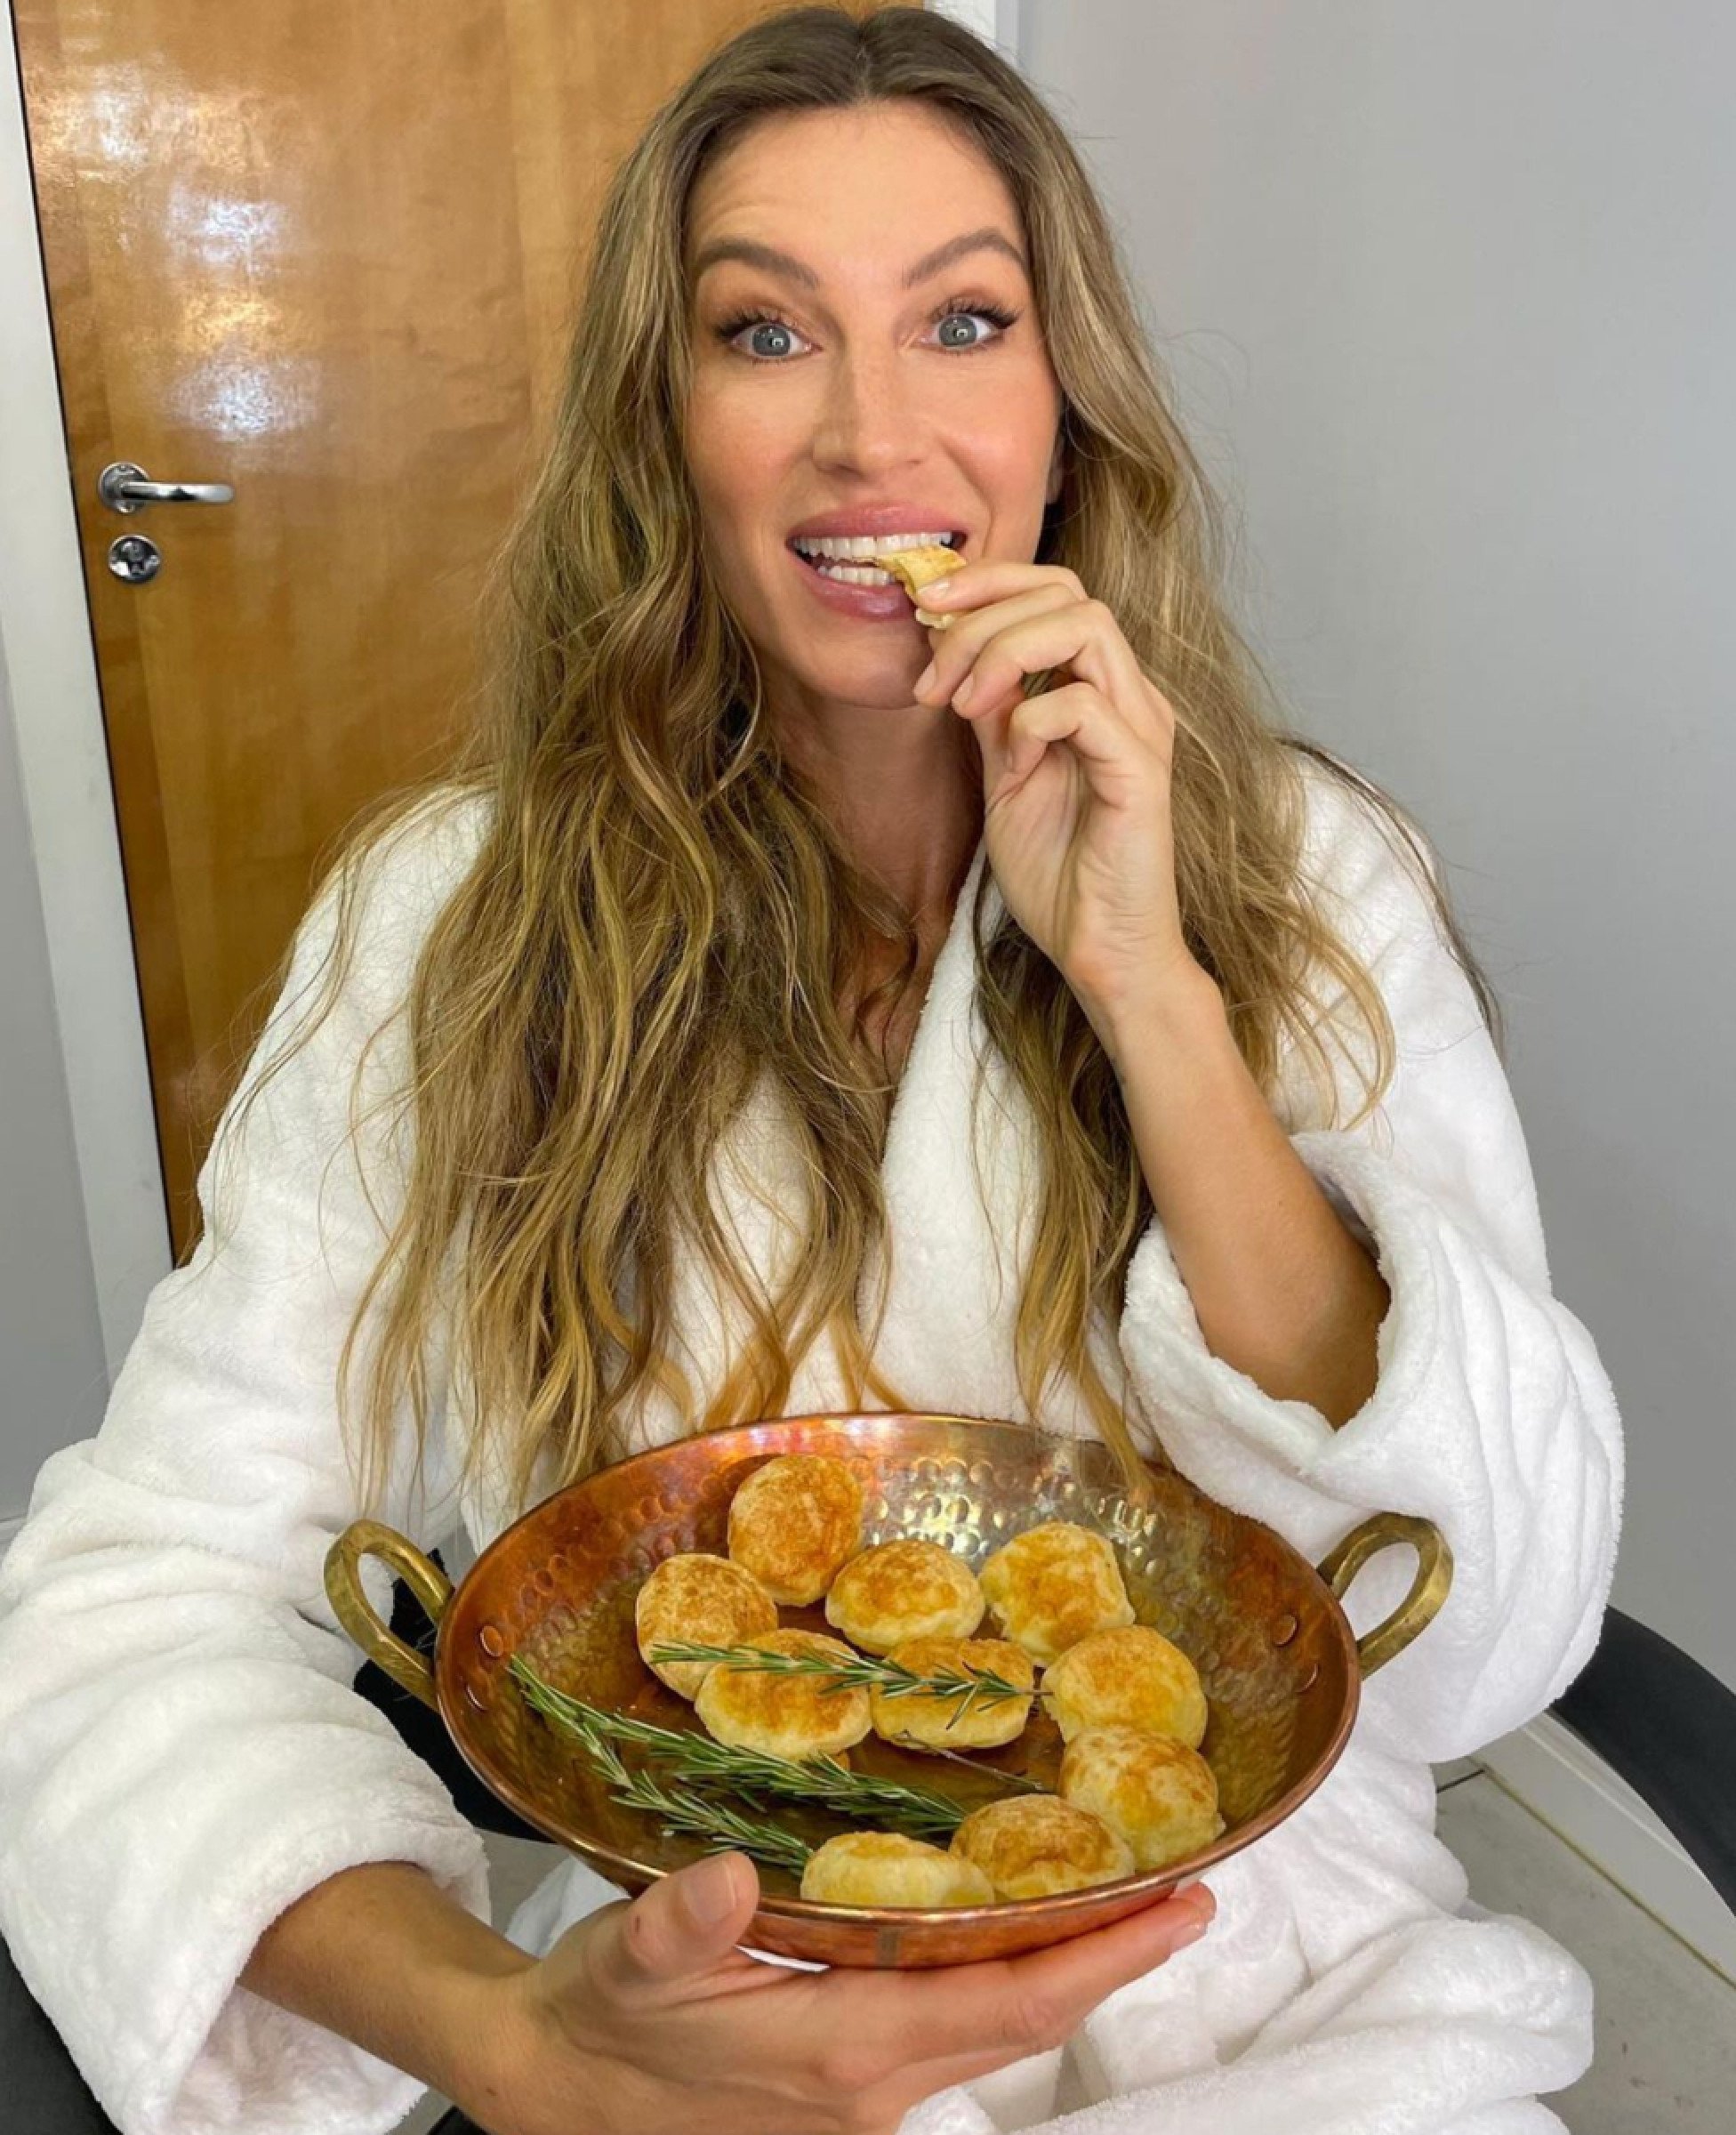 Inside Gisele Bündchen's glowing wellness routine: 10 unexpected ways the  supermodel stays in shape, from oil pulling and jiu-jitsu to her Dior serum  – plus her workouts are 'harder' than ex Tom